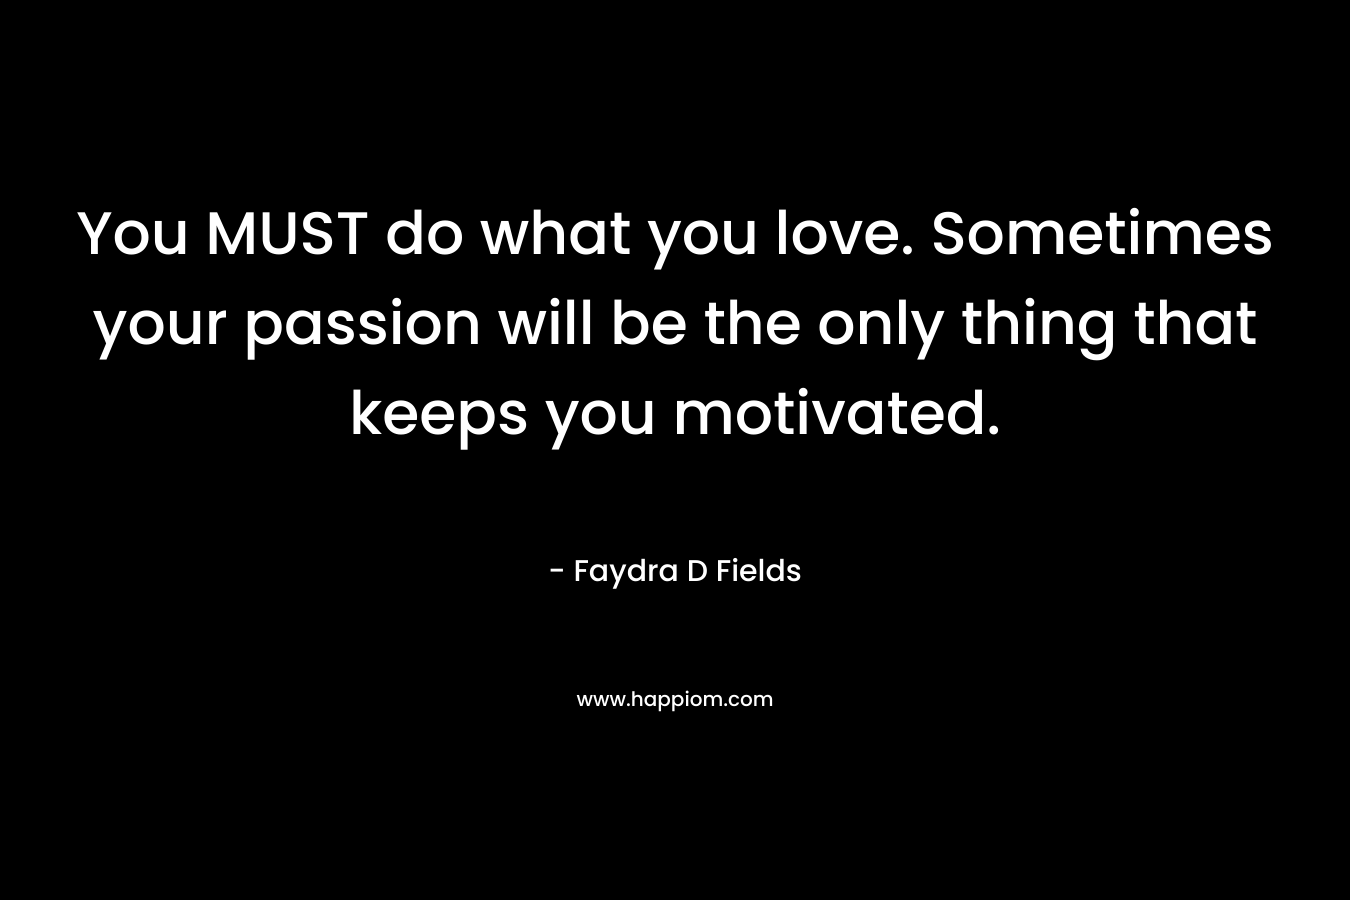 You MUST do what you love. Sometimes your passion will be the only thing that keeps you motivated. – Faydra D Fields